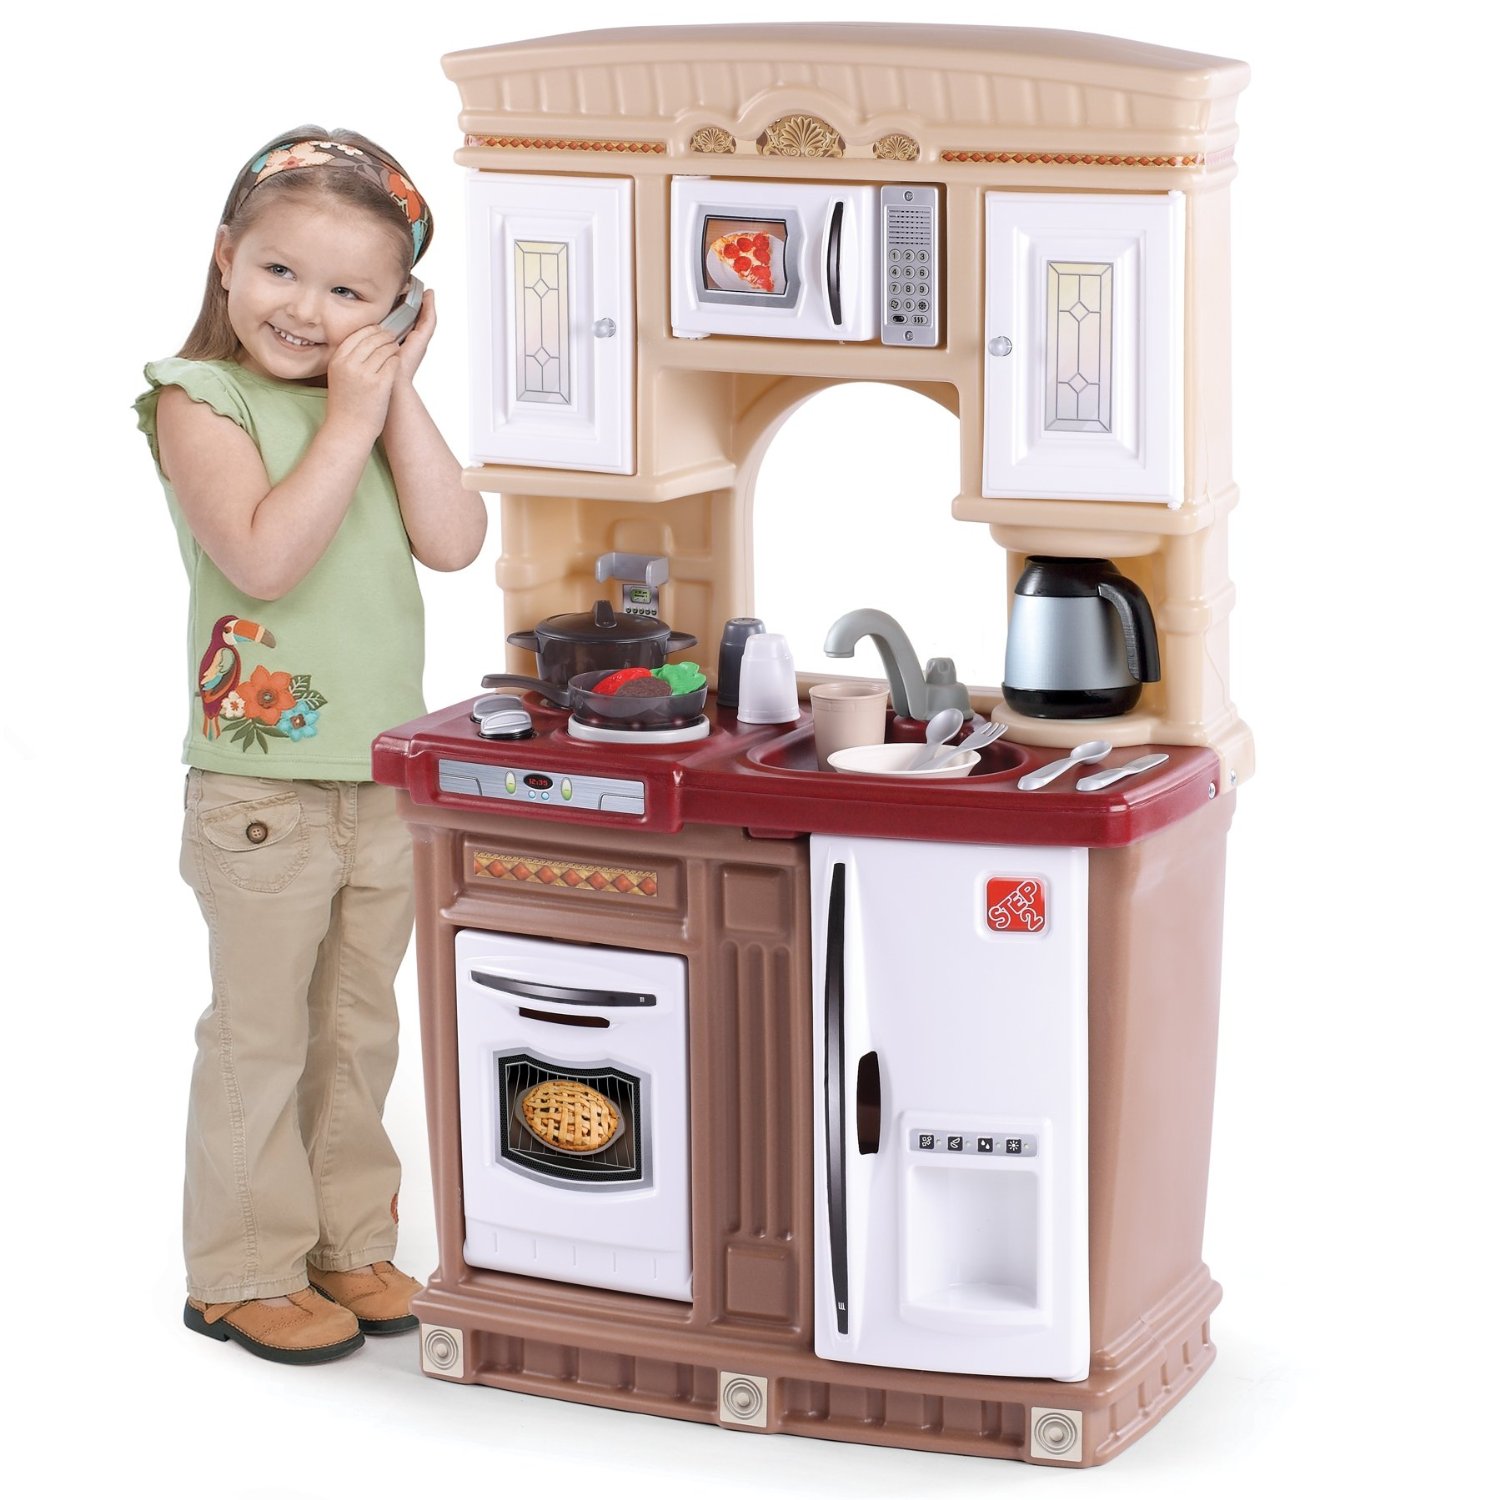 Top 10 Best Play Kitchen Sets for 2017 Top Value Reviews